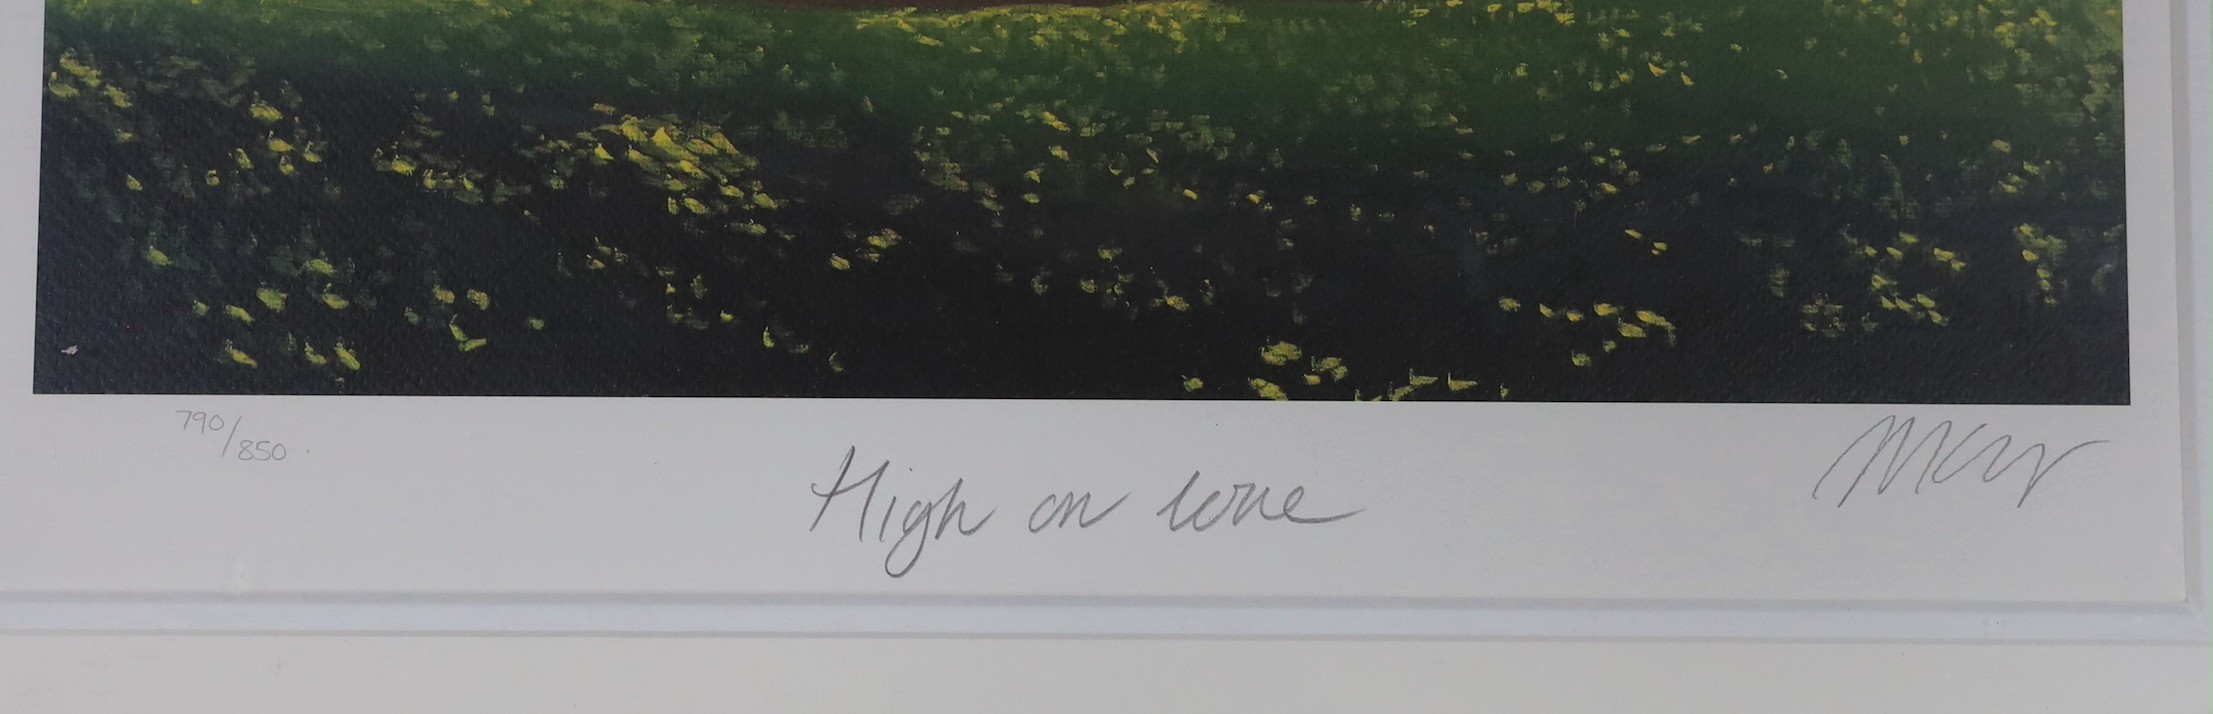 Mackenzie Thorpe (b.1956), limited edition print, ‘High on Love’, signed, inscribed, edition 790/850, 50 x 40cm